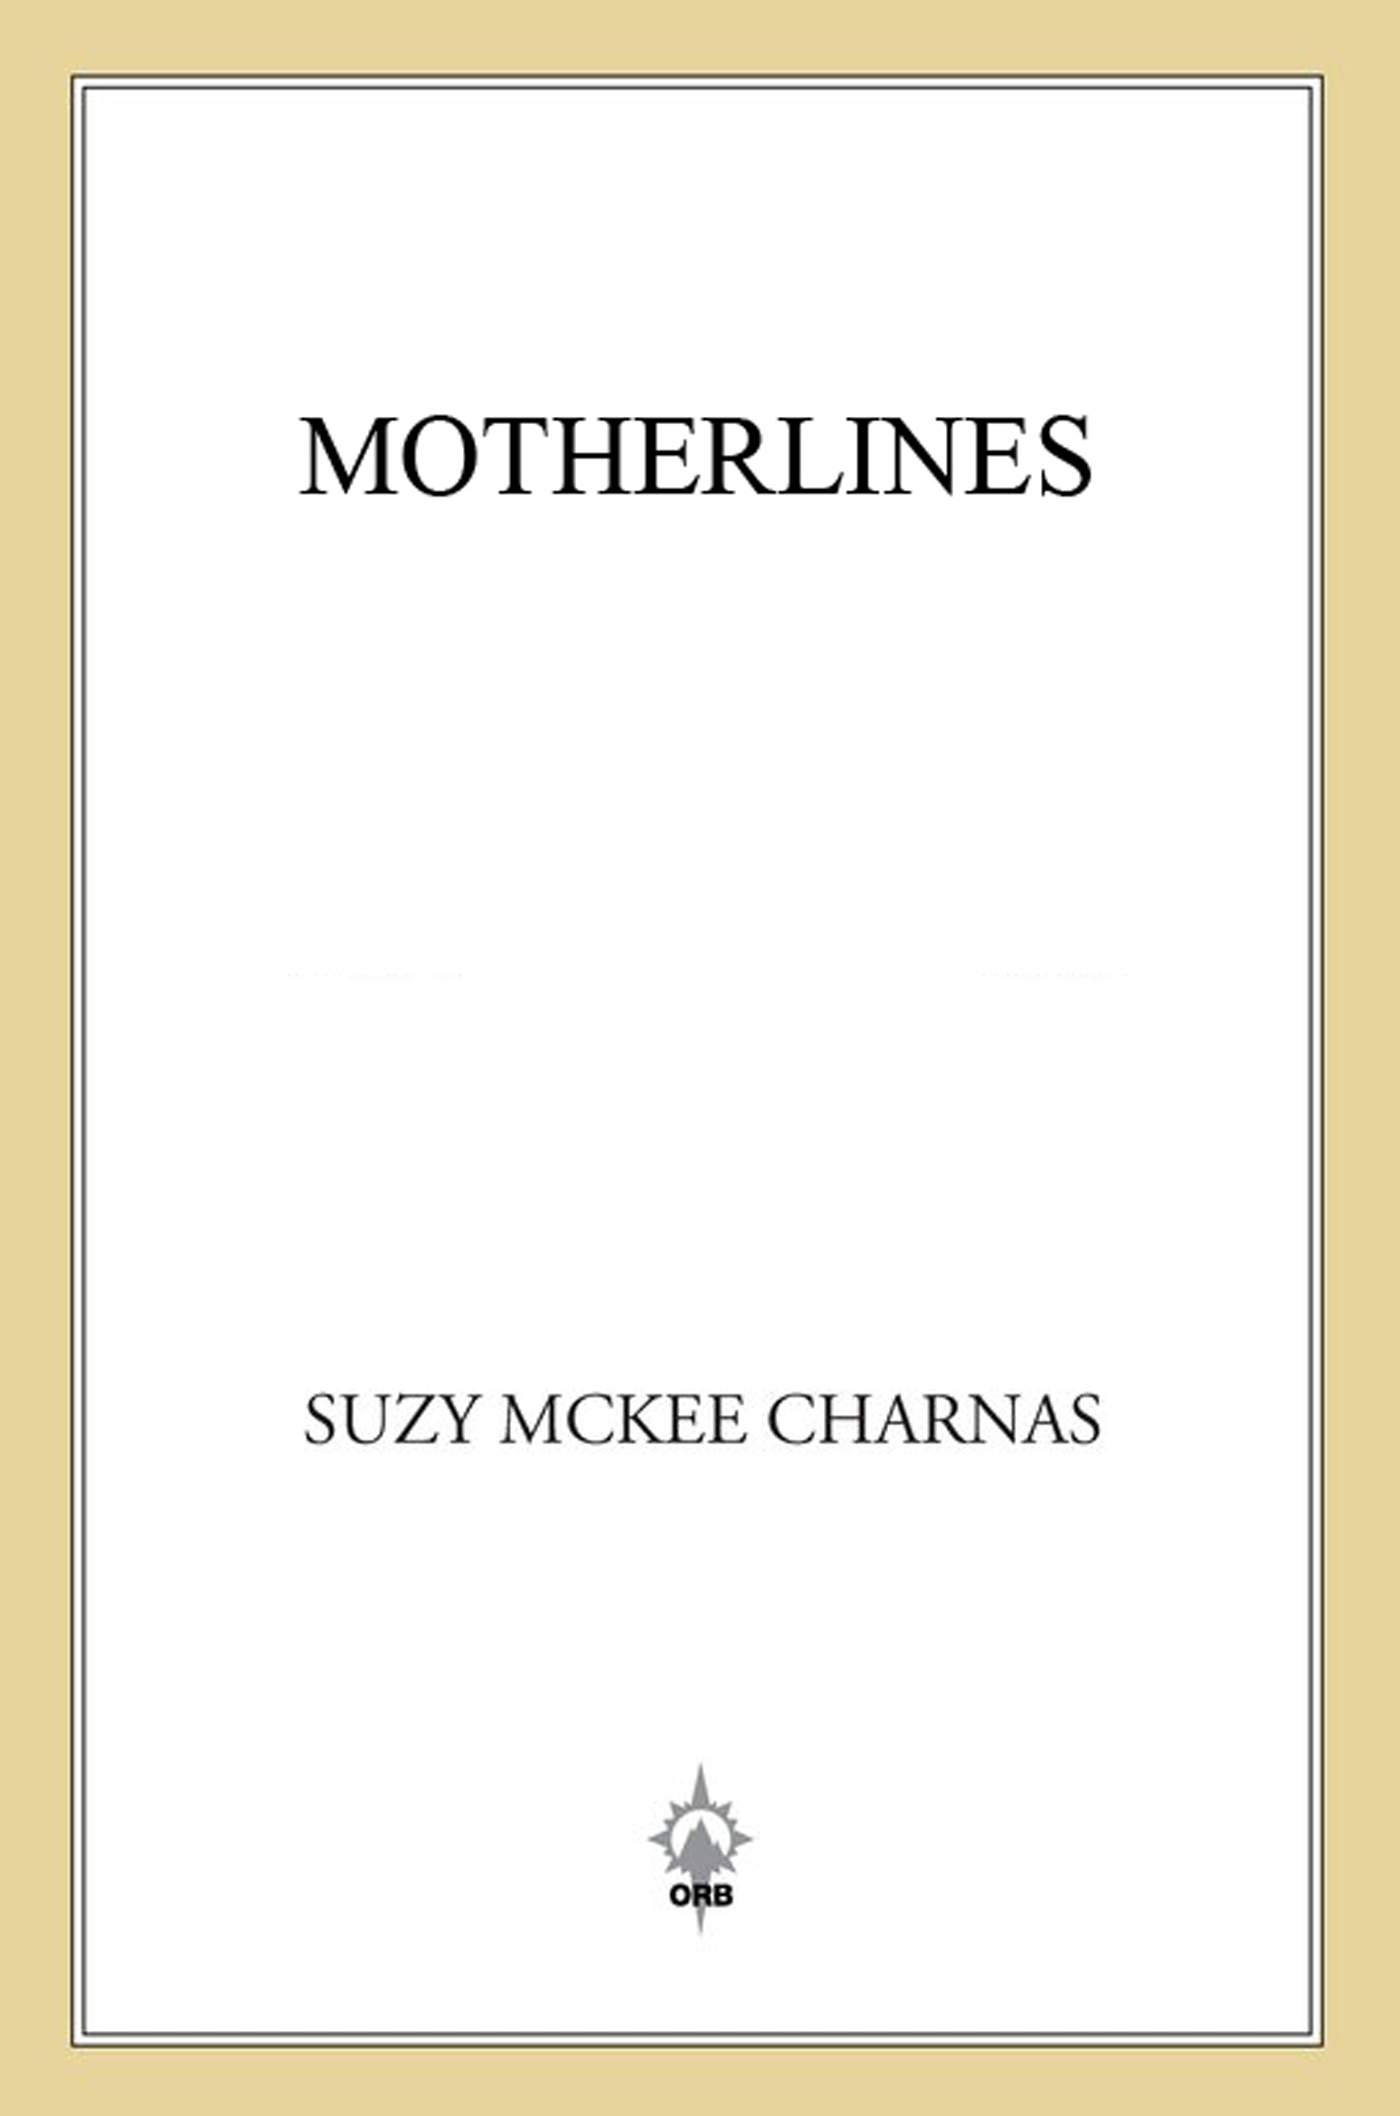 Motherlines : Book Two of 'The Holdfast Chronicles' by Suzy McKee Charnas